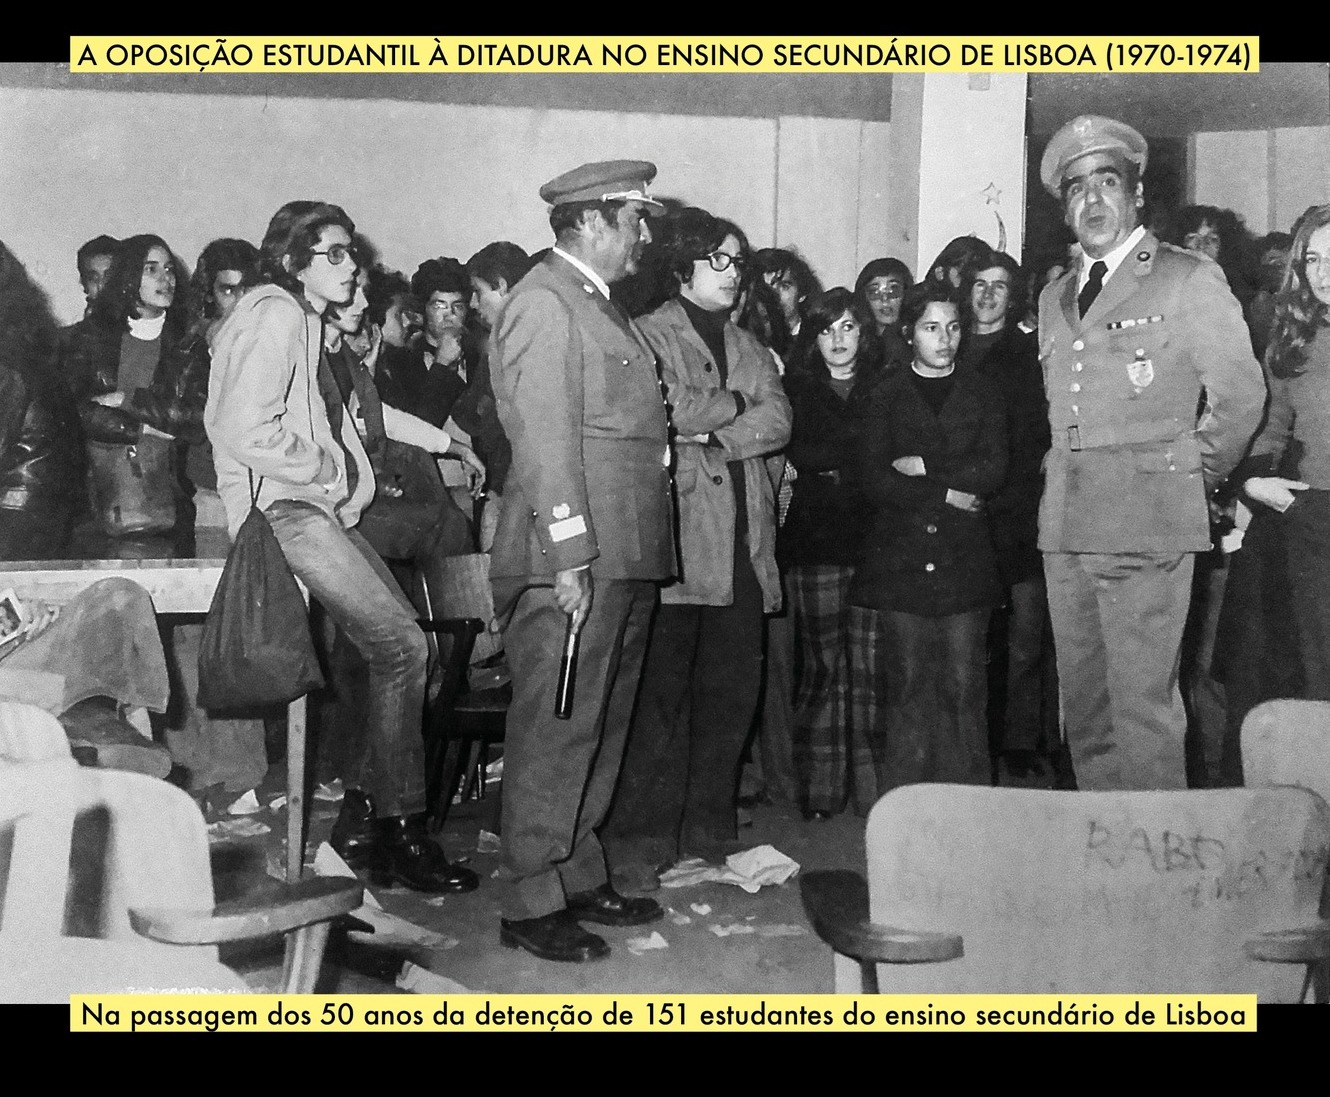 There's always someone who says no! Student opposition to the dictatorship in Lisbon secondary schools (1970-1974)<span id="edit_43724"><script>$(function() { $('#edit_43724').load( "/myces/user/editobj.php?tipo=evento&id=43724" ); });</script></span>